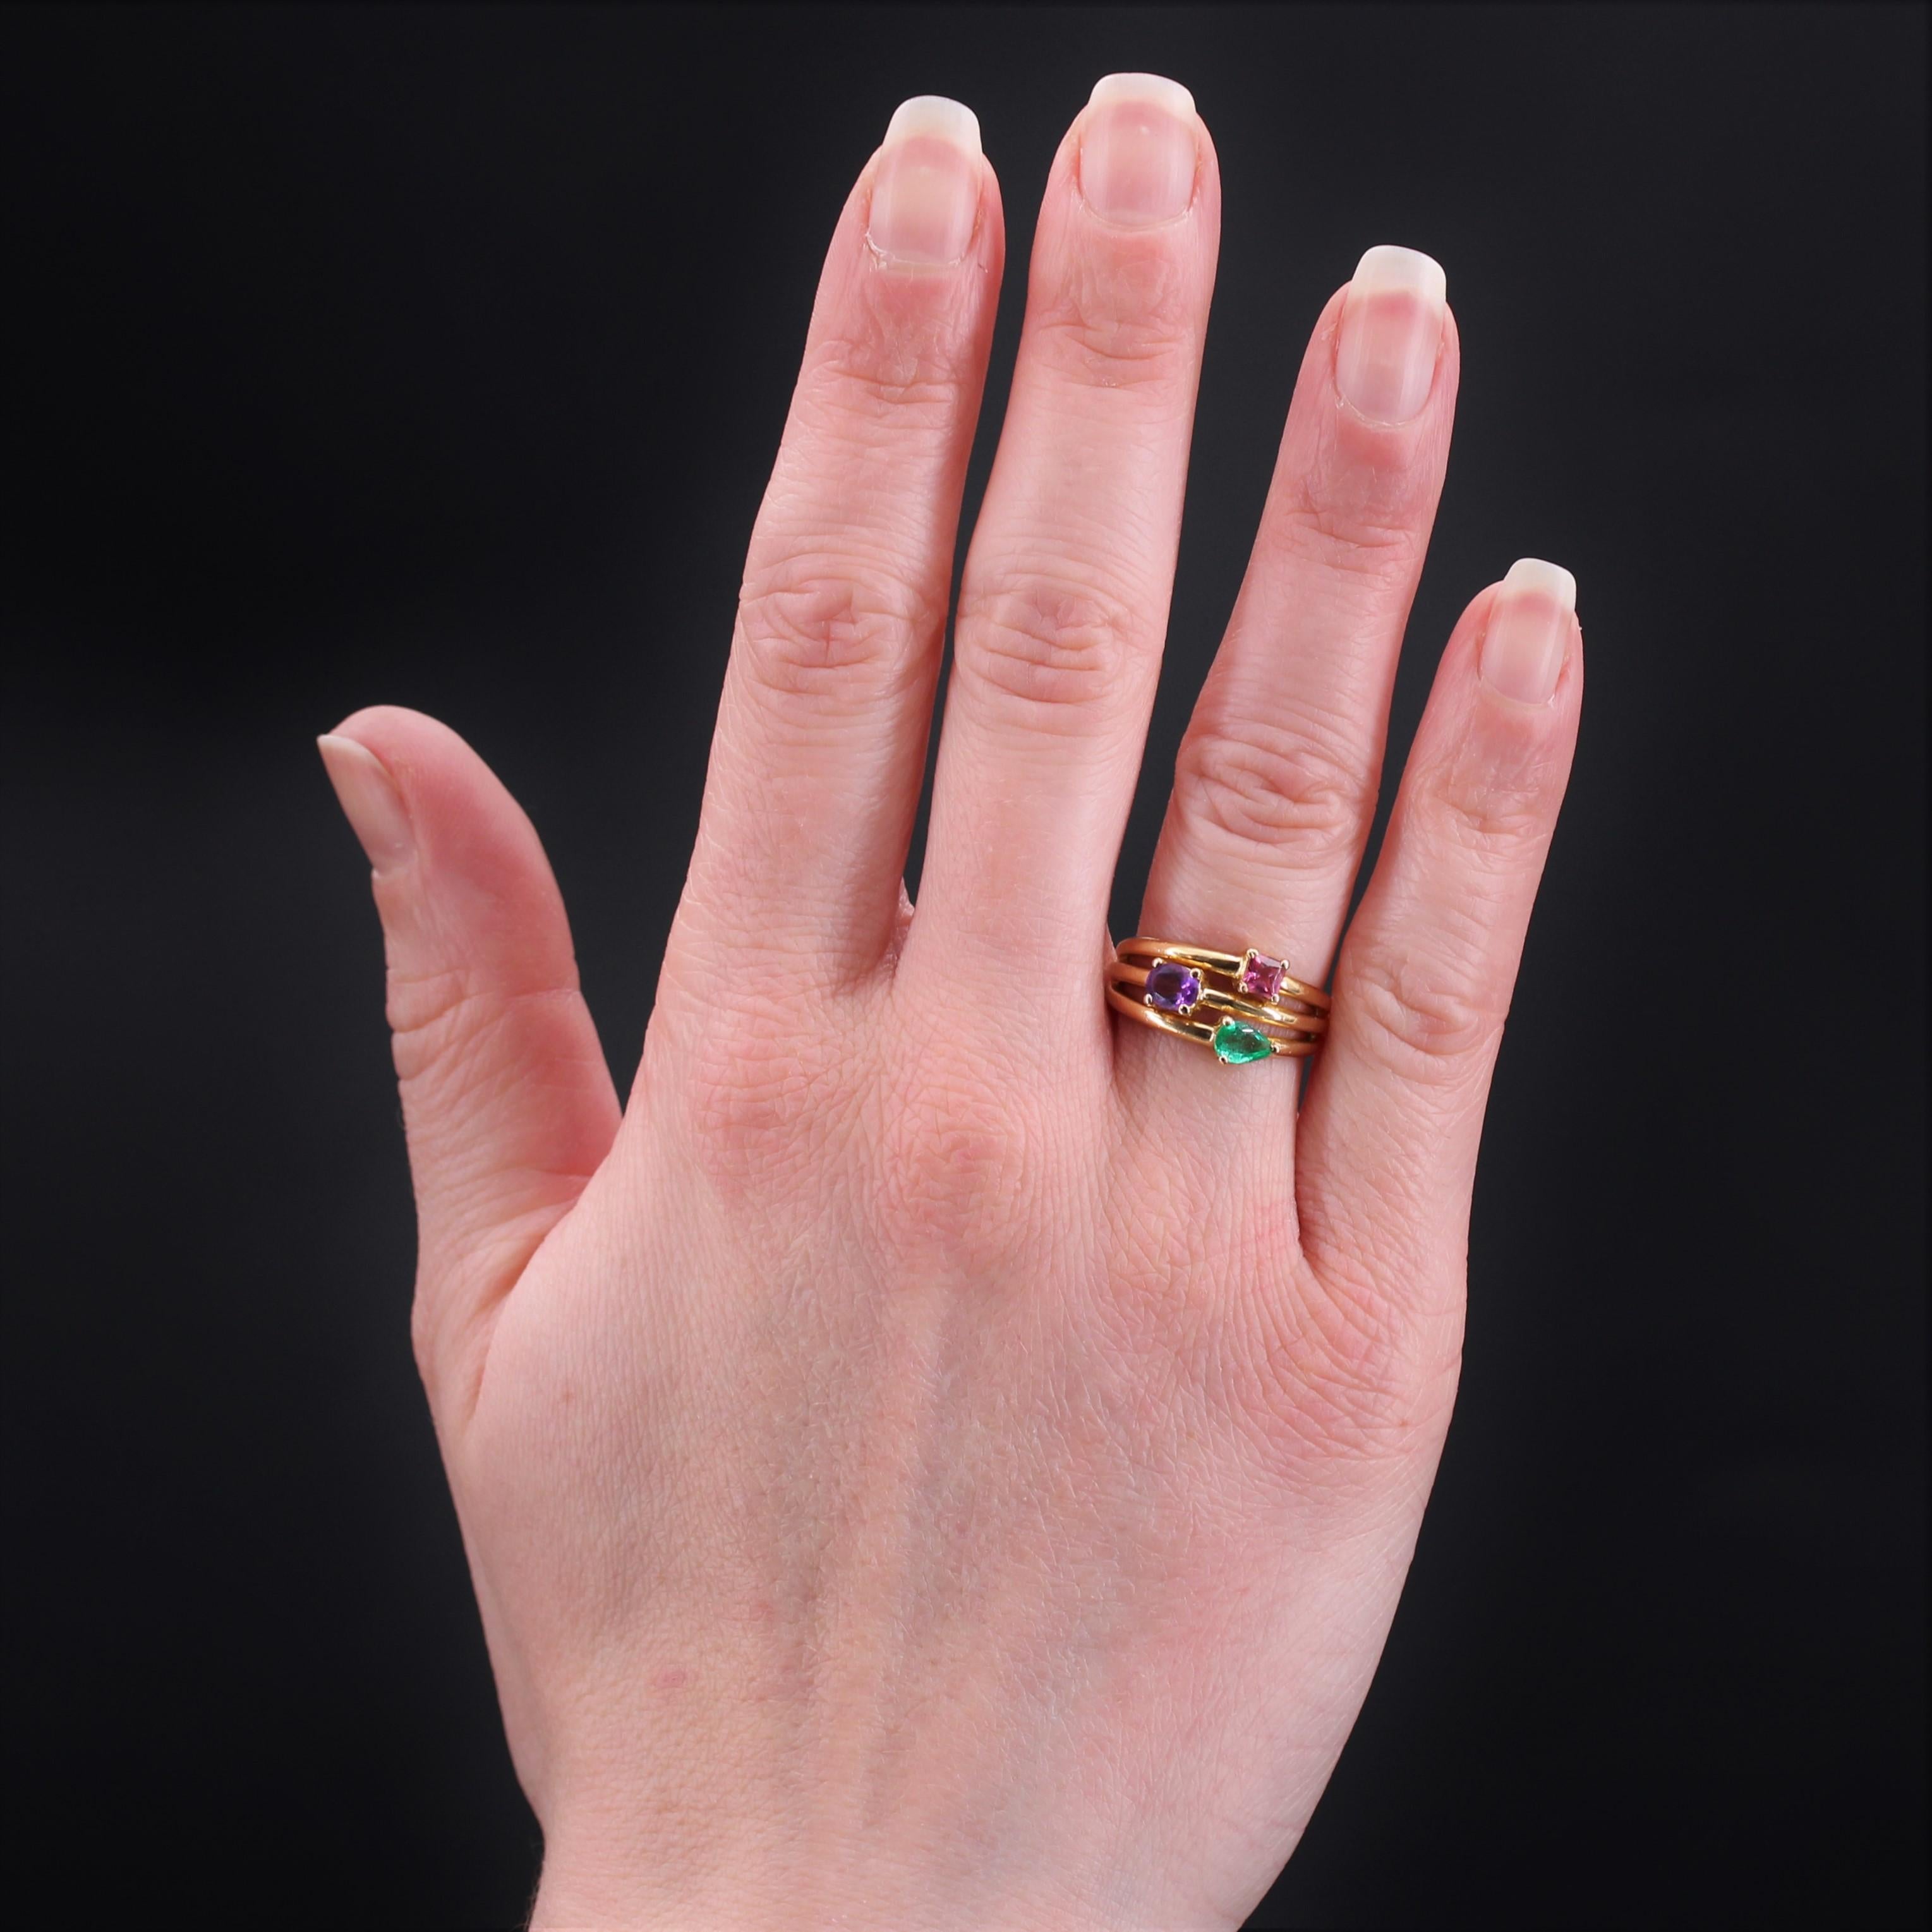 Ring in 18 karat yellow gold, eagle head hallmark.
Second- hand gold ring, it is formed of 3 rings openworked between them which join to form only one at the base. Each ring is decorated with a gemstone or fine stone held in claws : a pear emerald,